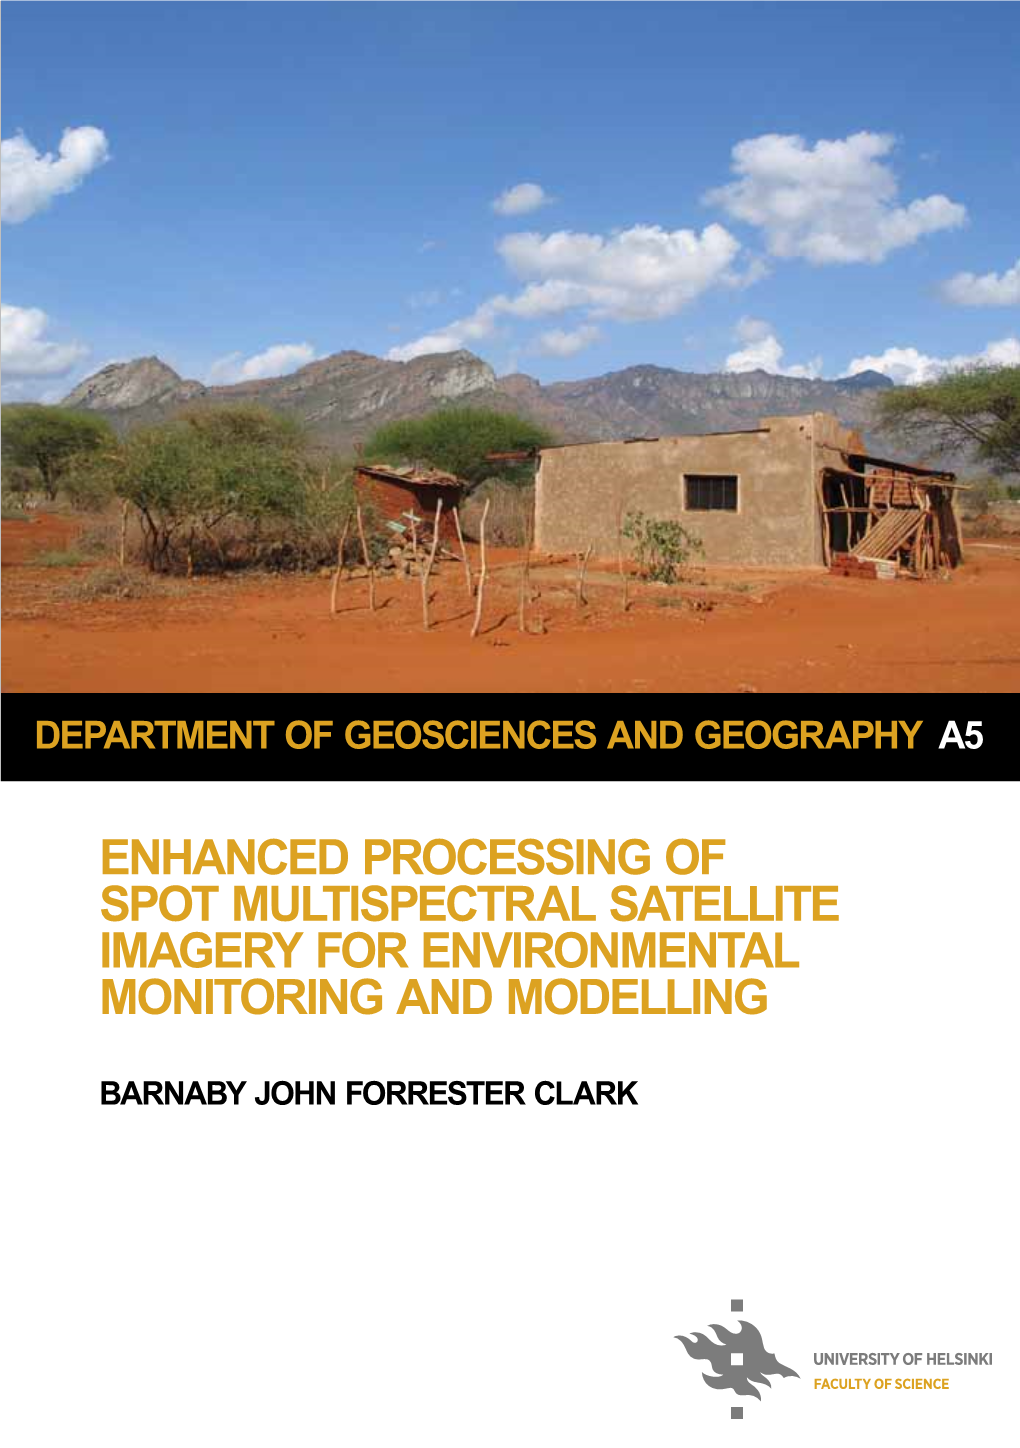 Enhanced Processing of SPOT Multispectral Satellite Imagery for Environmental Monitoring and Modelling